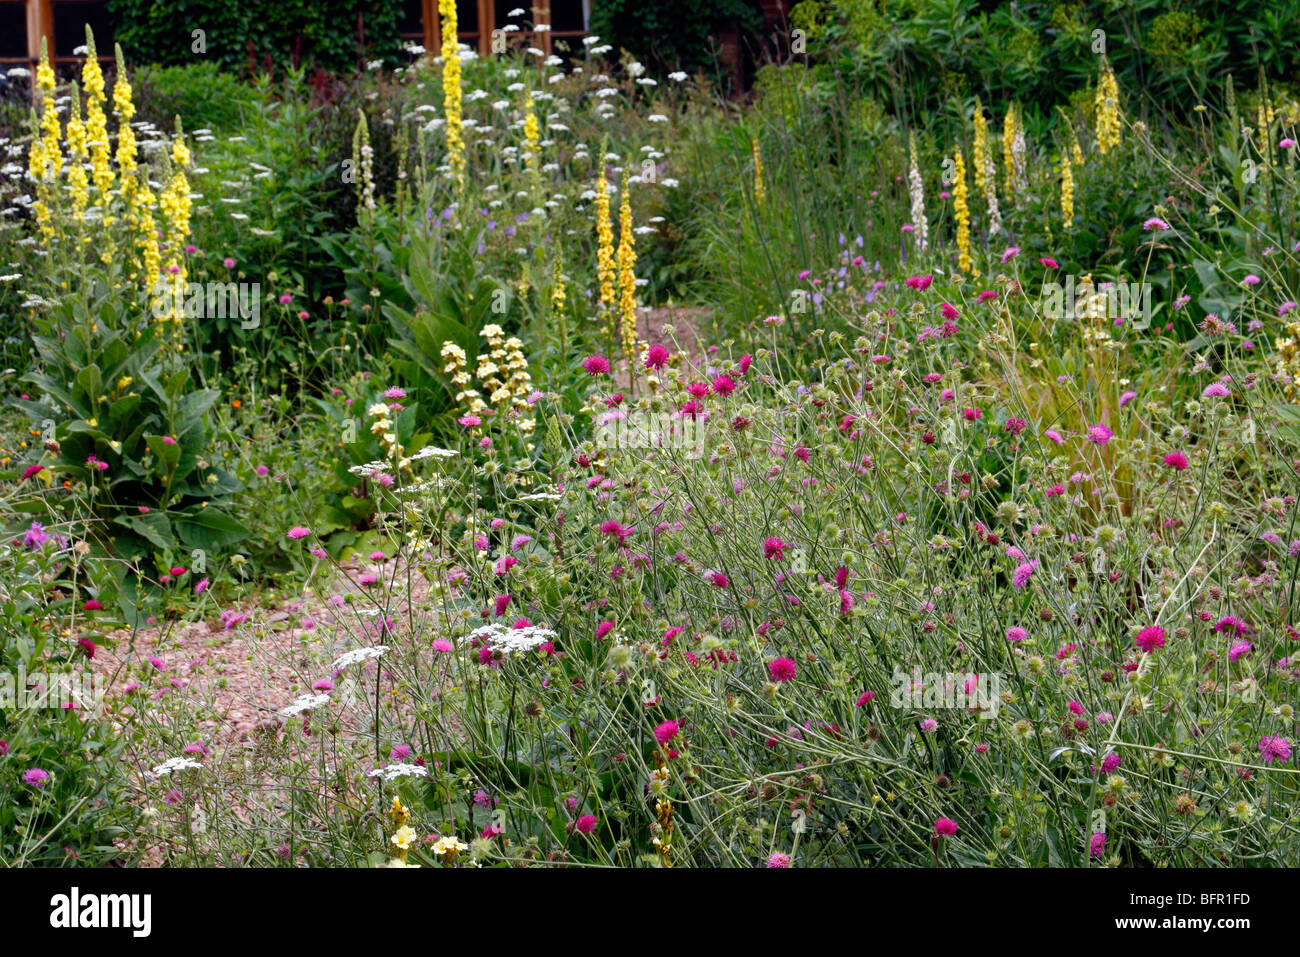 Naturalistic plantings in Holbrook Garden with Knautia macedonica and Verbascum chaixii Stock Photo